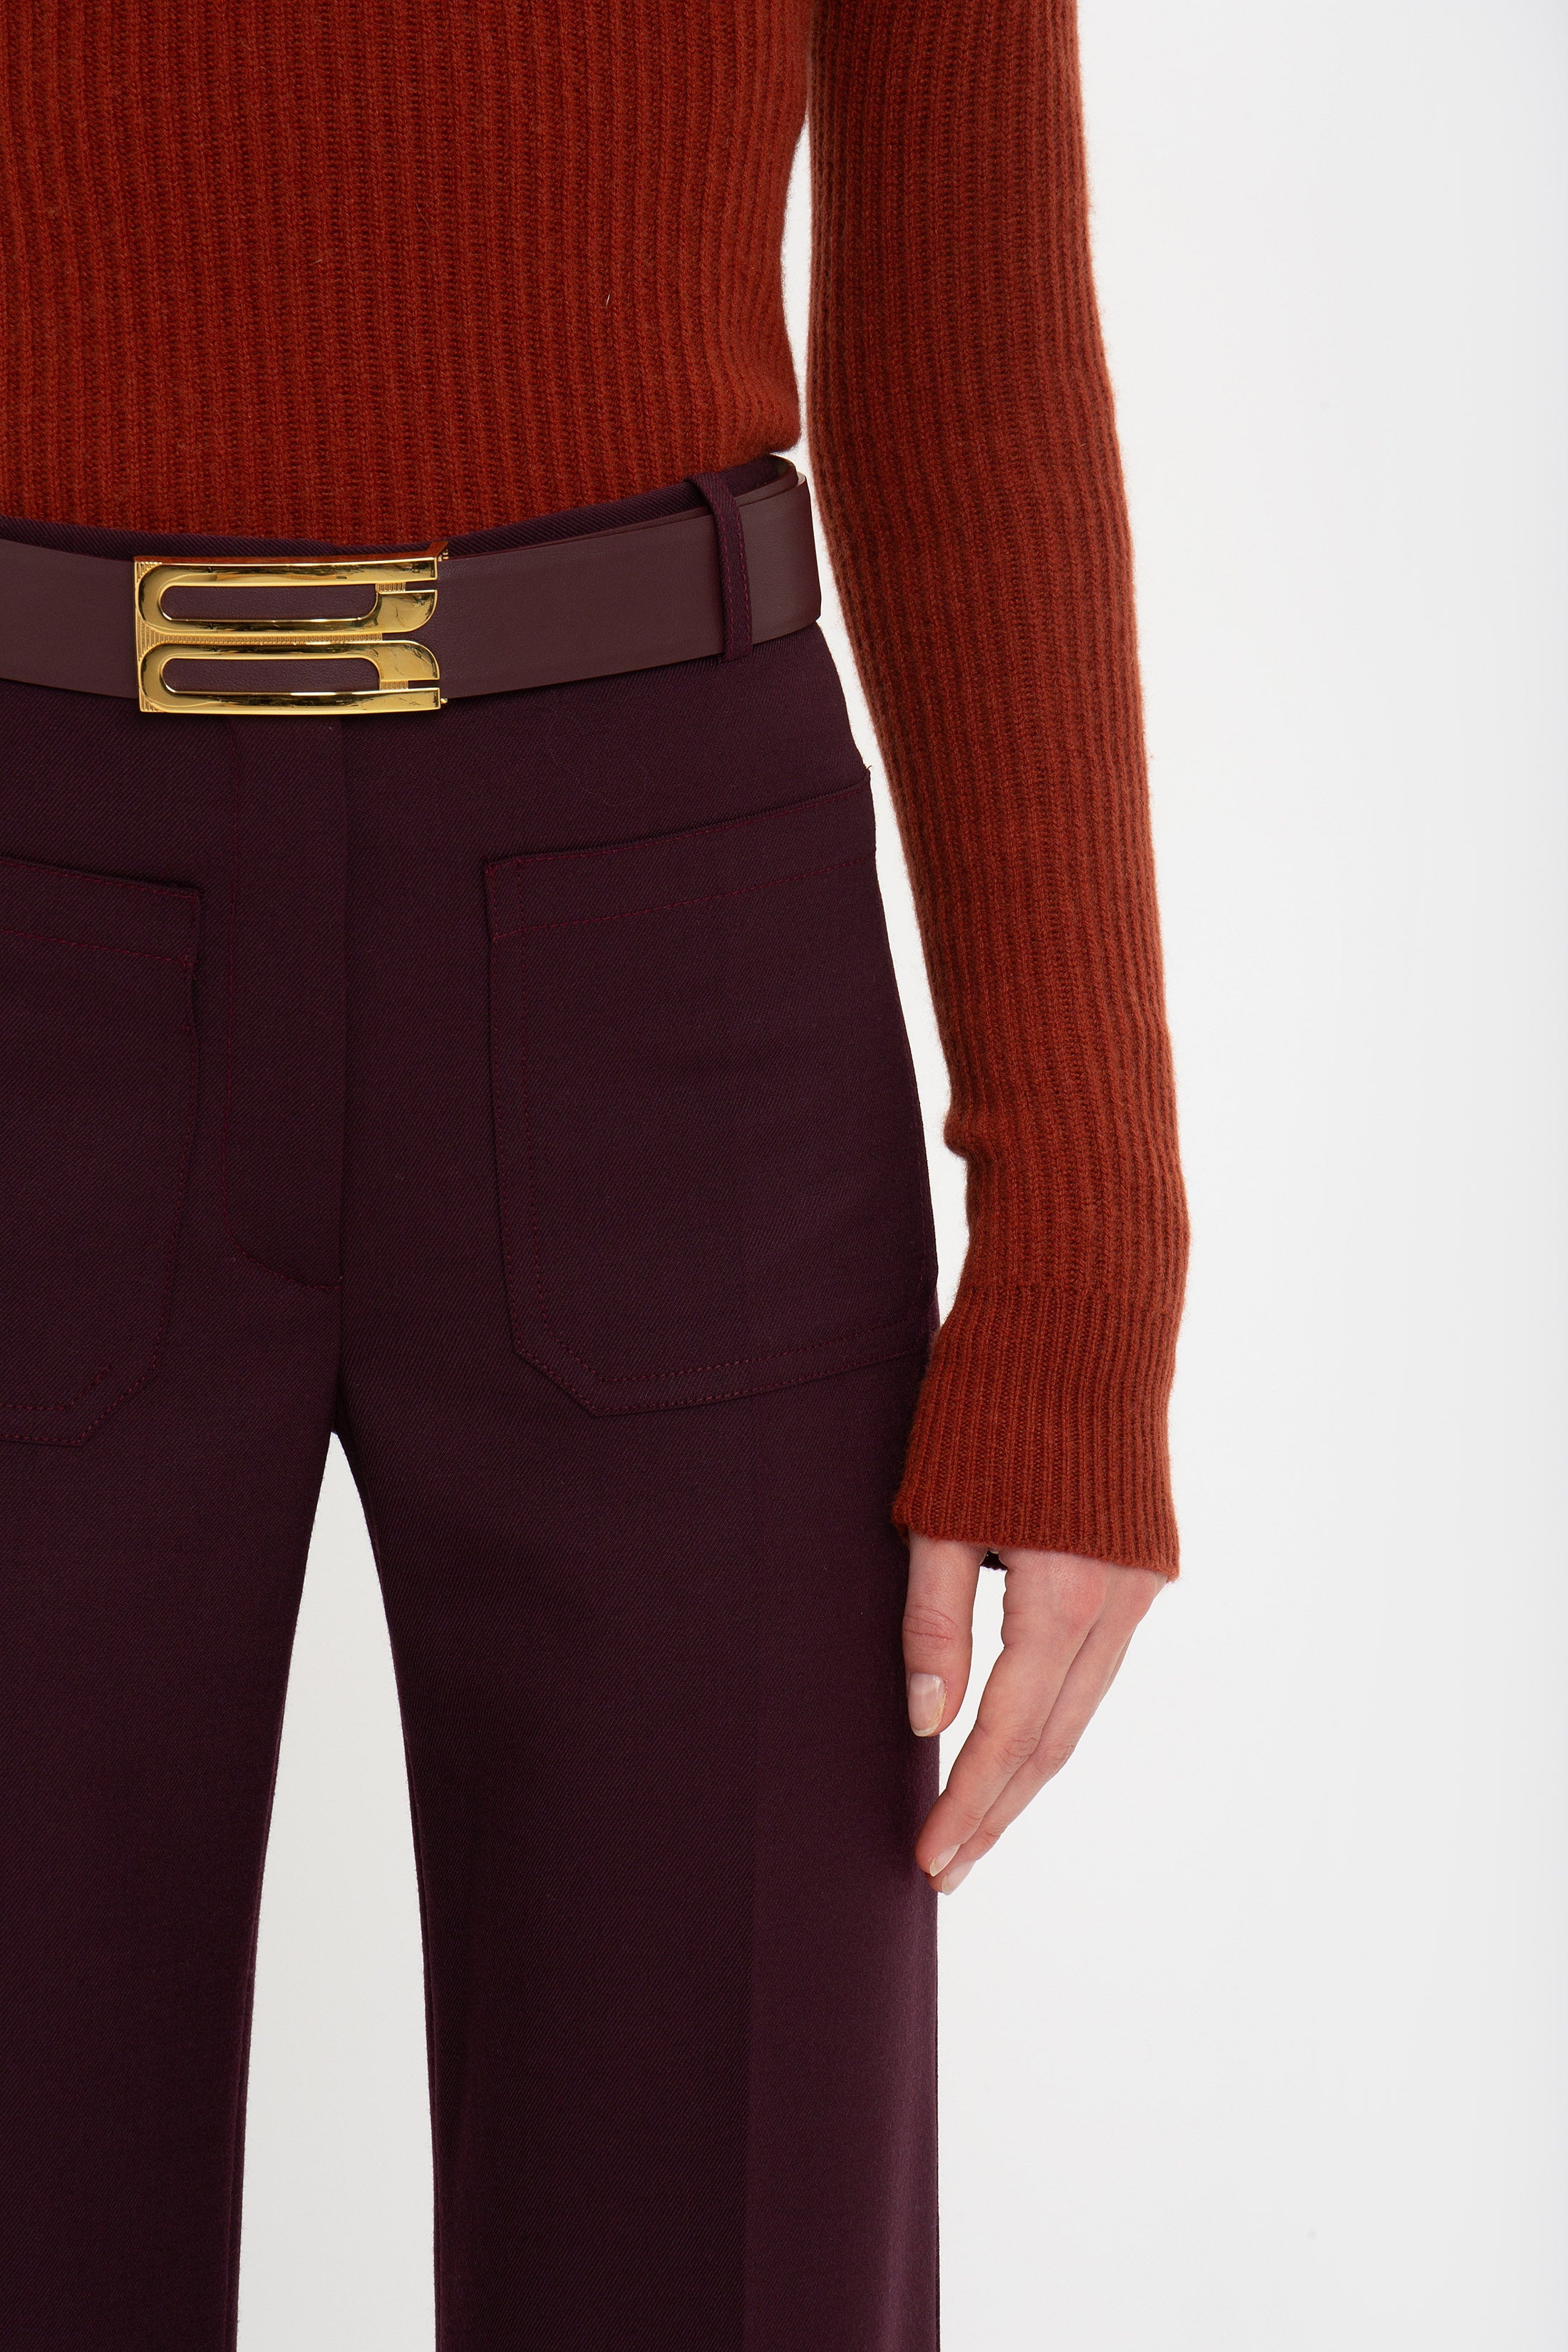 Double Collared Jumper In Russet - 2